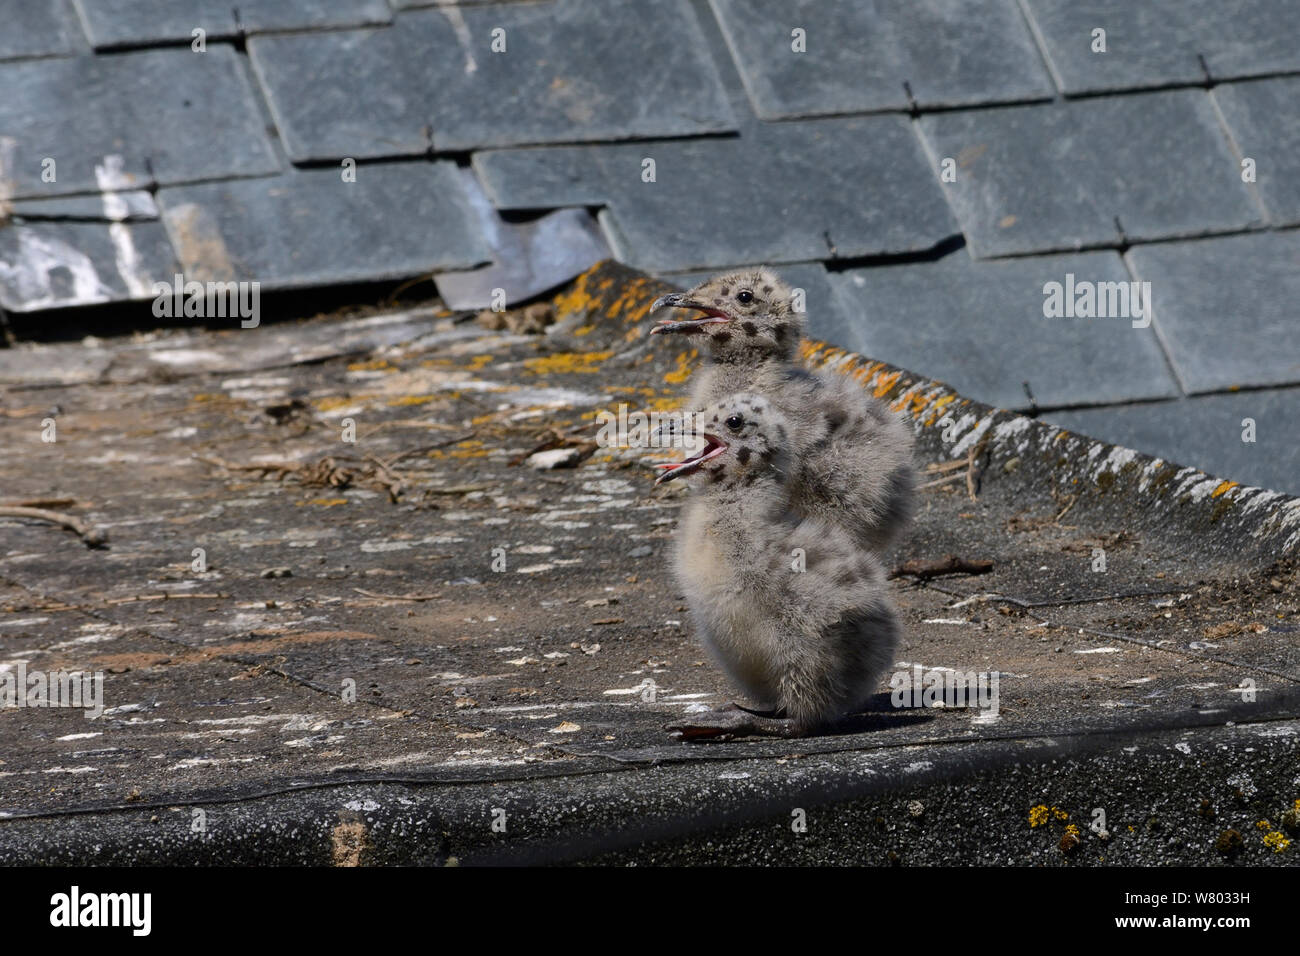 Two Herring gull chicks (Larus argentatus) on a rooftop, gaping in hot weather, St.Ives, Cornwall, UK, June. Stock Photo